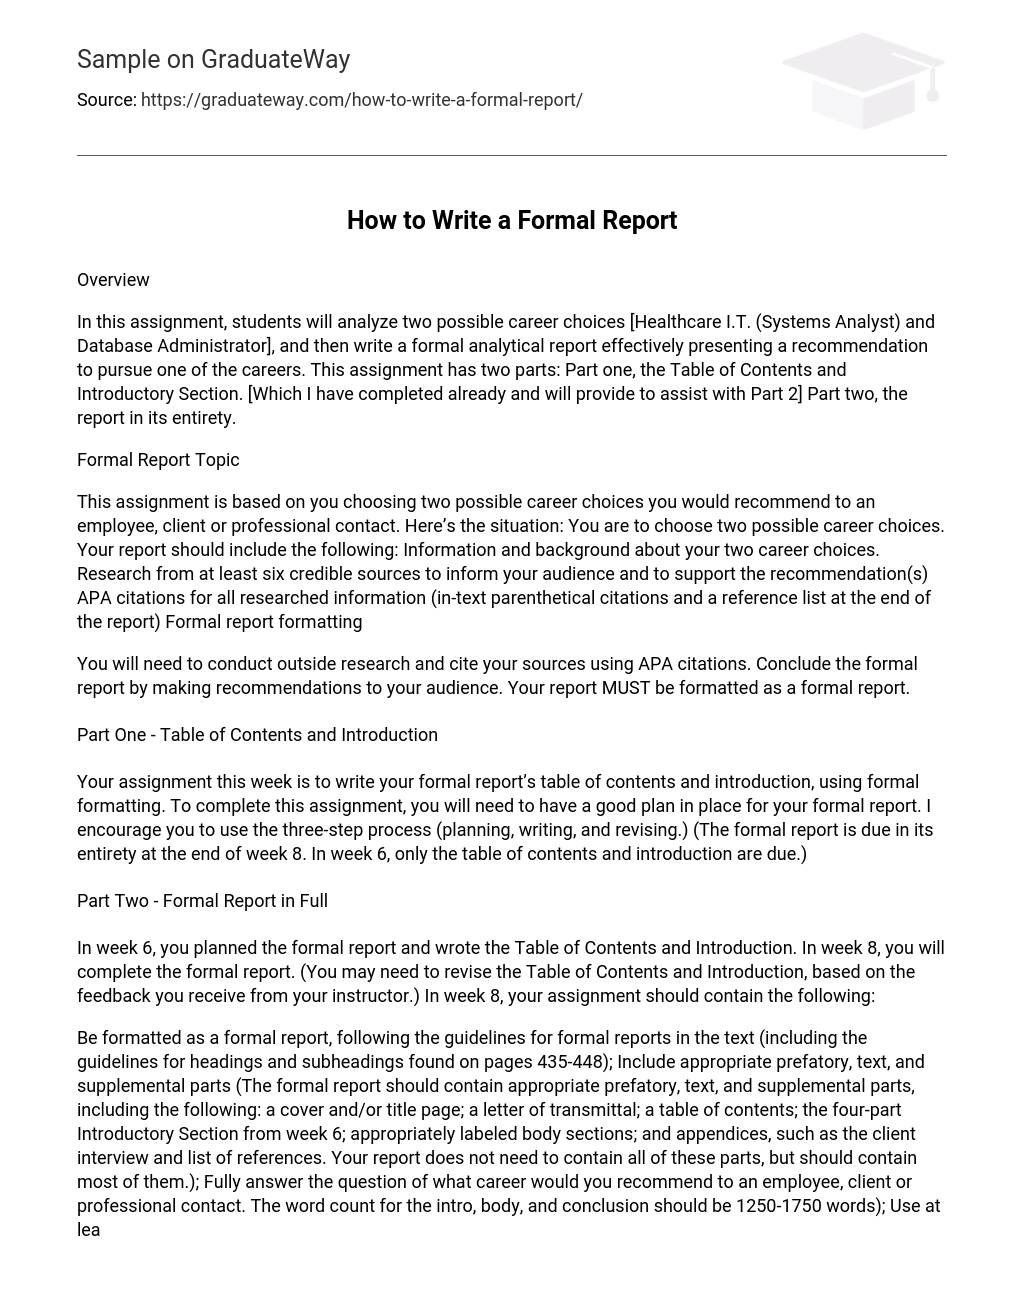 How to Write a Formal Report